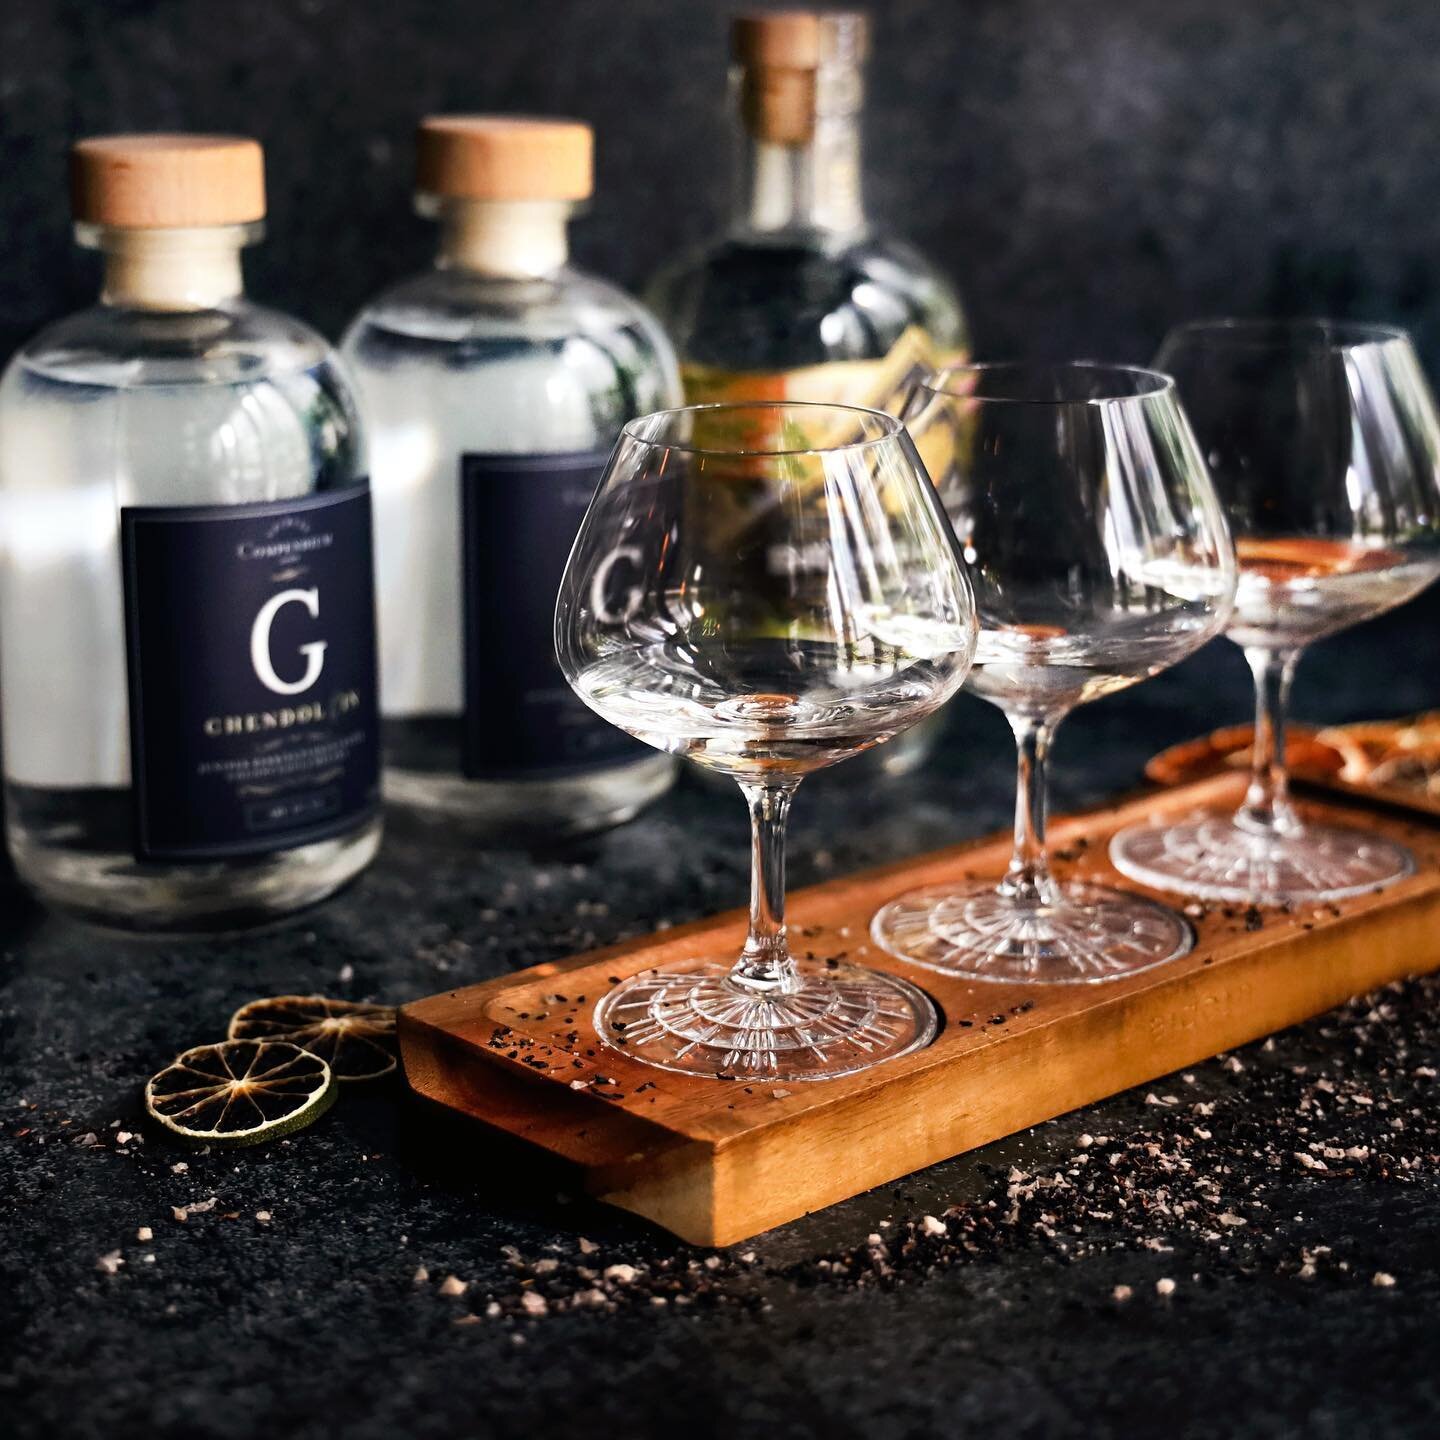 Putting a spotlight on homegrown gin, CIN CIN welcomes serious gin lovers and curious explorers onboard the Singapore Flight for an thrilling experience. Sip into tasting portions of 𝐁𝐫𝐚𝐬𝐬 𝐋𝐢𝐨𝐧 𝐒𝐢𝐧𝐠𝐚𝐩𝐨𝐫𝐞 𝐃𝐫𝐲 𝐆𝐢𝐧, 𝐂𝐨𝐦𝐩𝐞𝐧?